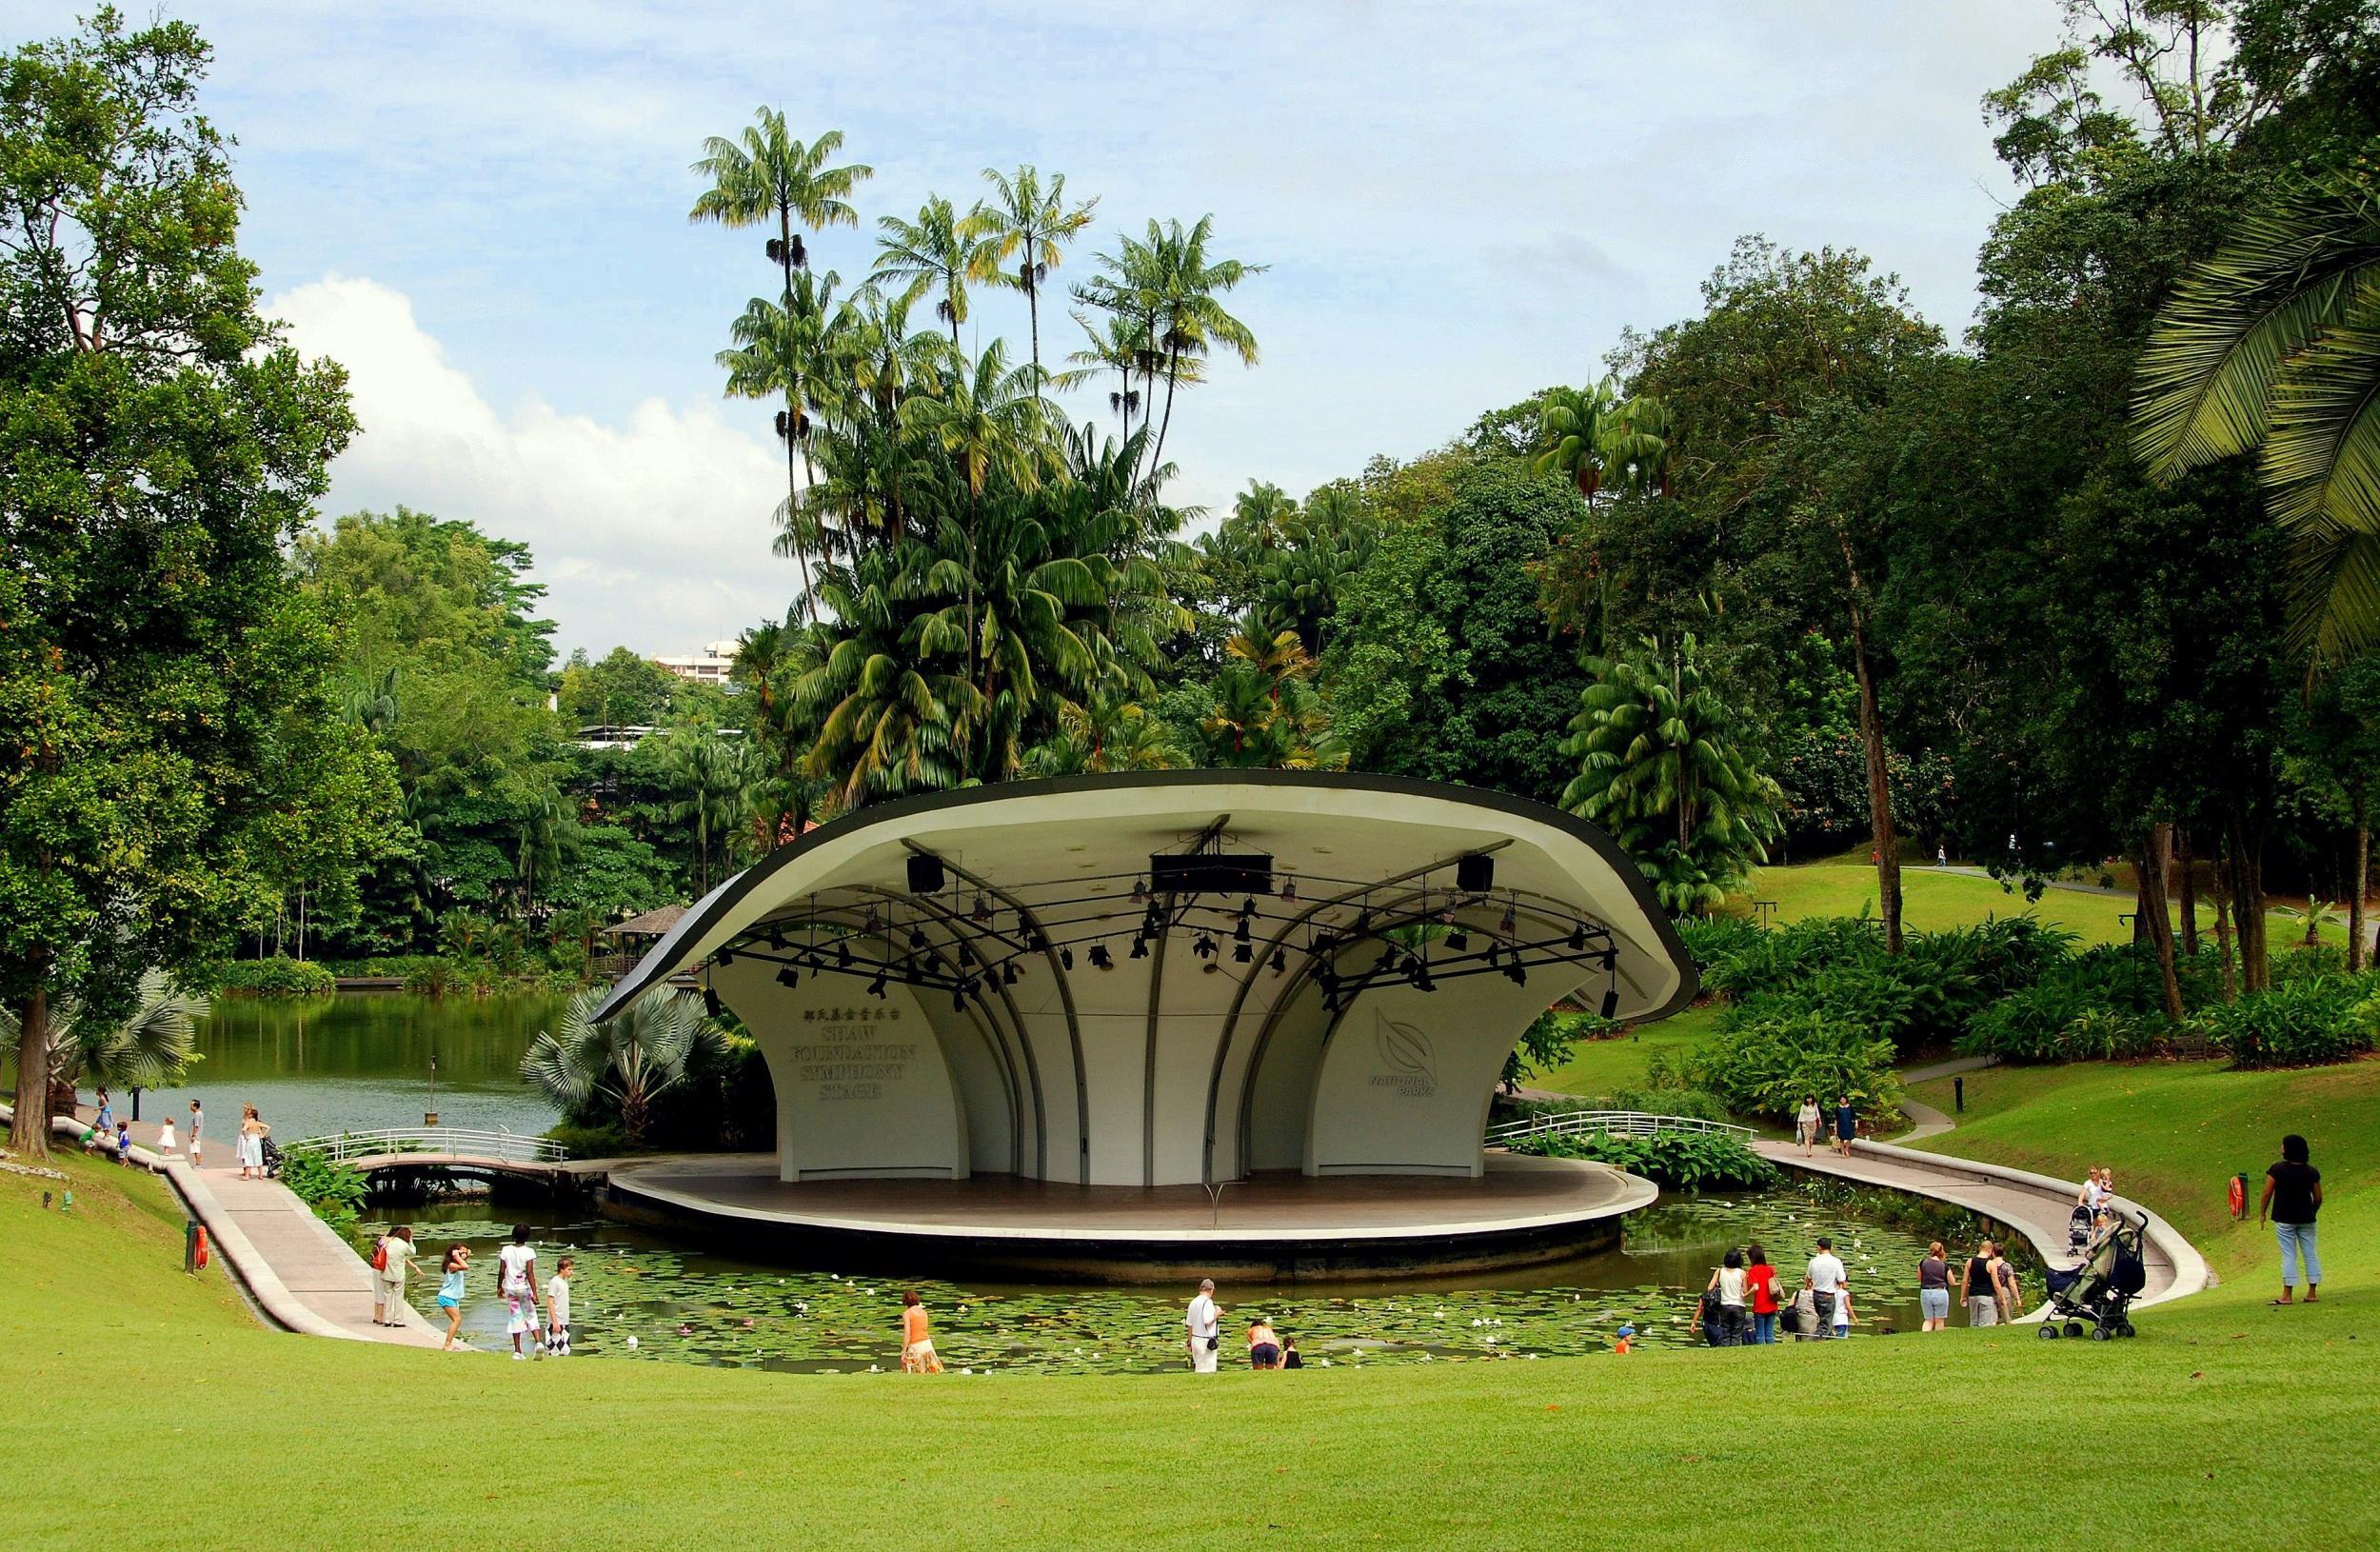 The Botanic Gardens have a stage for performances